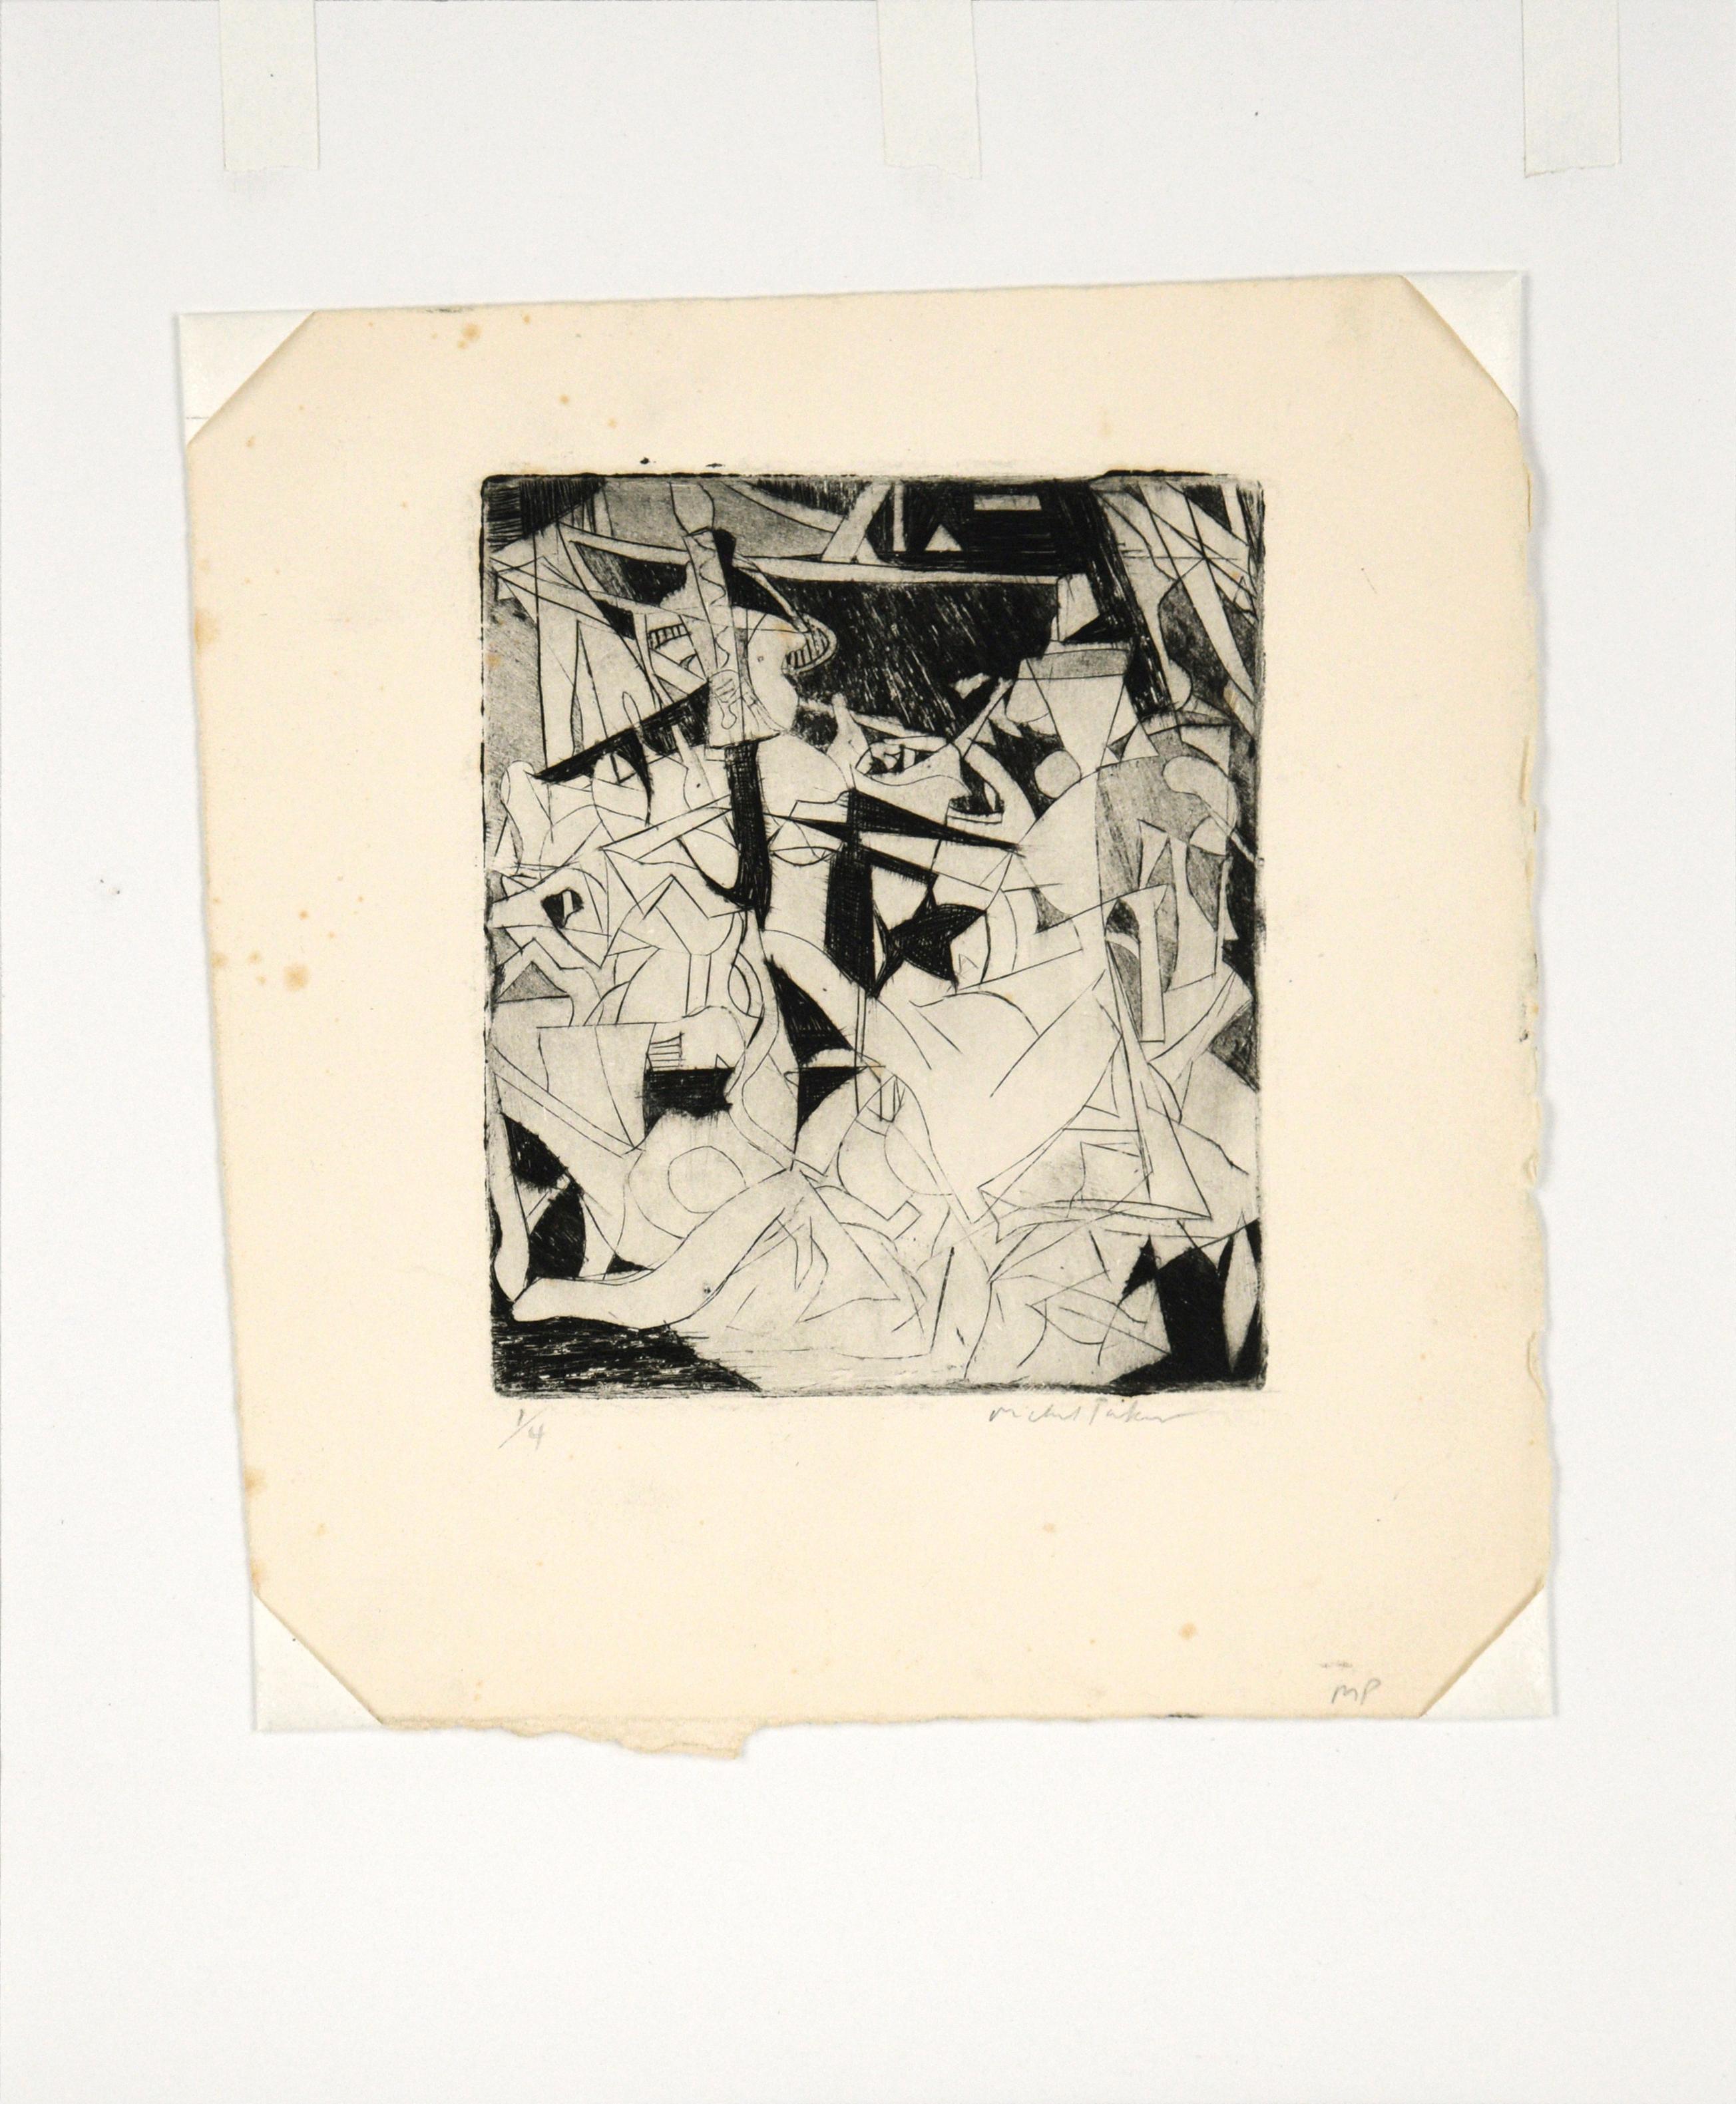 A wonderful small-scale abstract cubist etching by Bay Area artist Michael Pauker (American, b. 1957). Numbered (